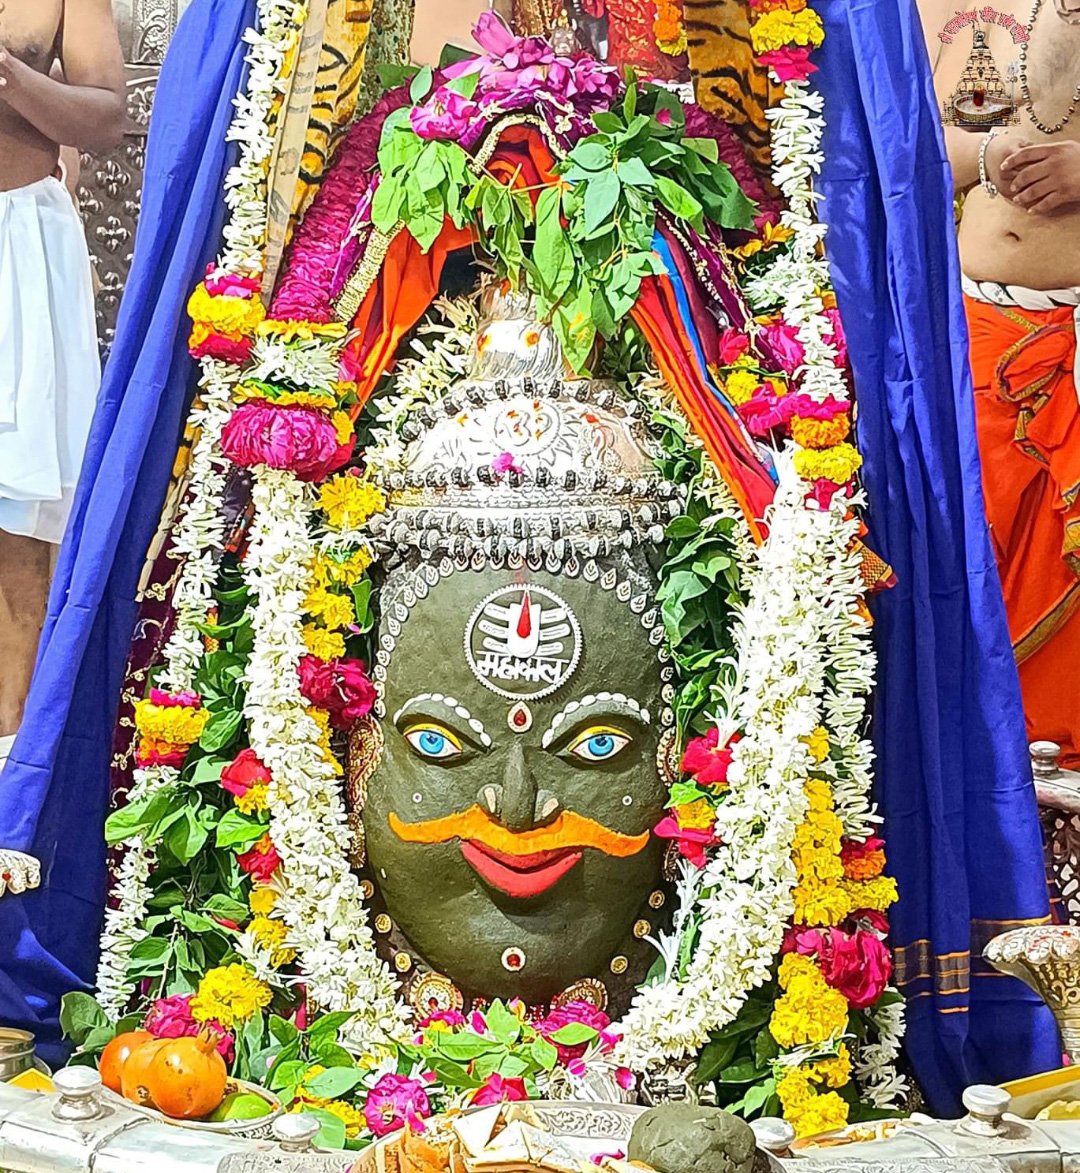 Booking of Mahakal Darshan from Ratlam closed in 2 days, registration of more than 1500 devotees